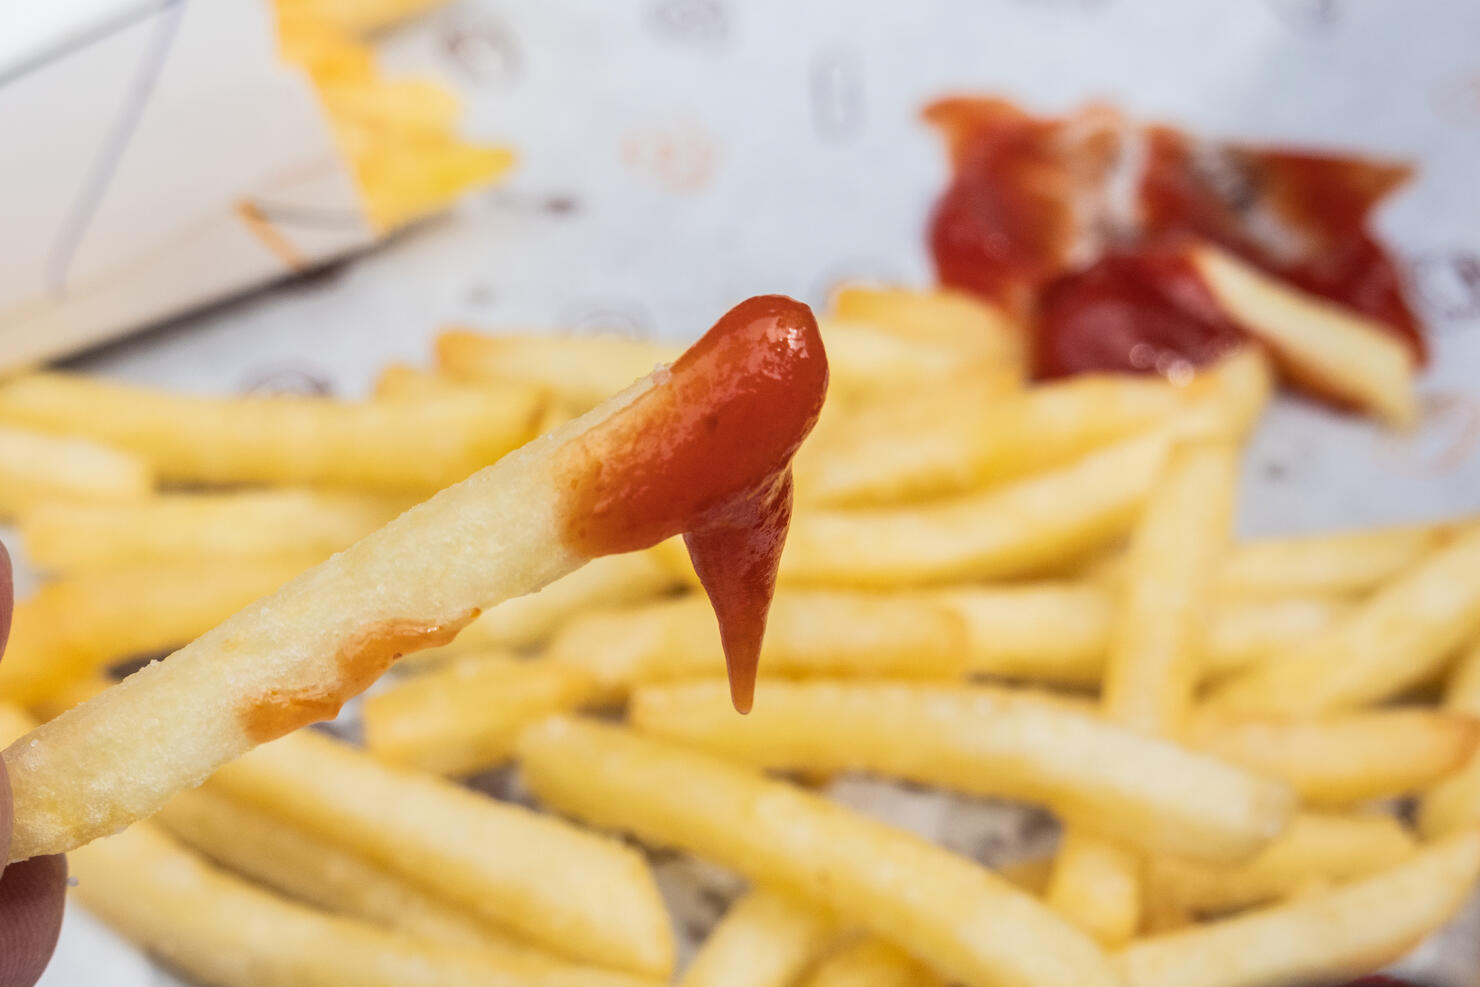 A person eating french fries with ketchup.